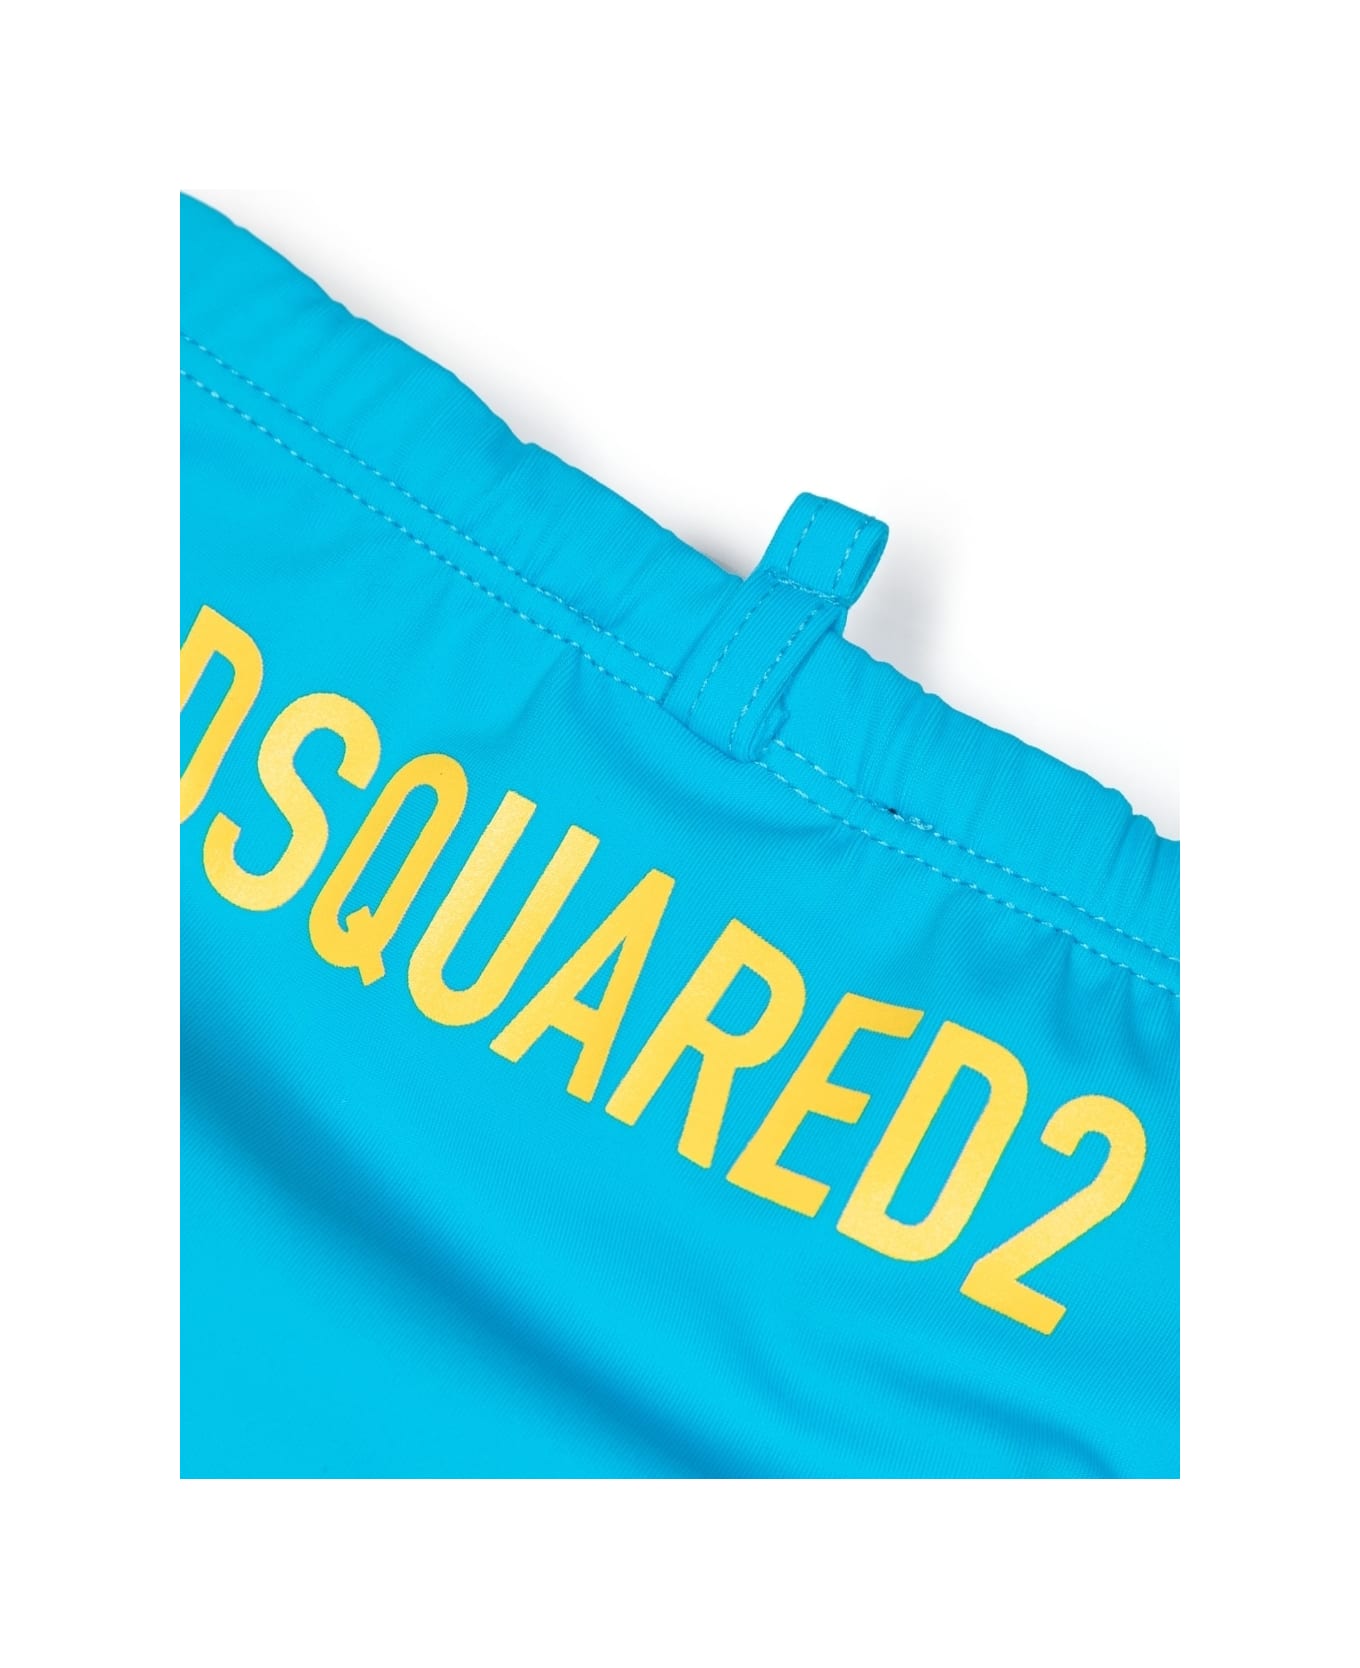 Dsquared2 Swimsuit With Print - Light blue